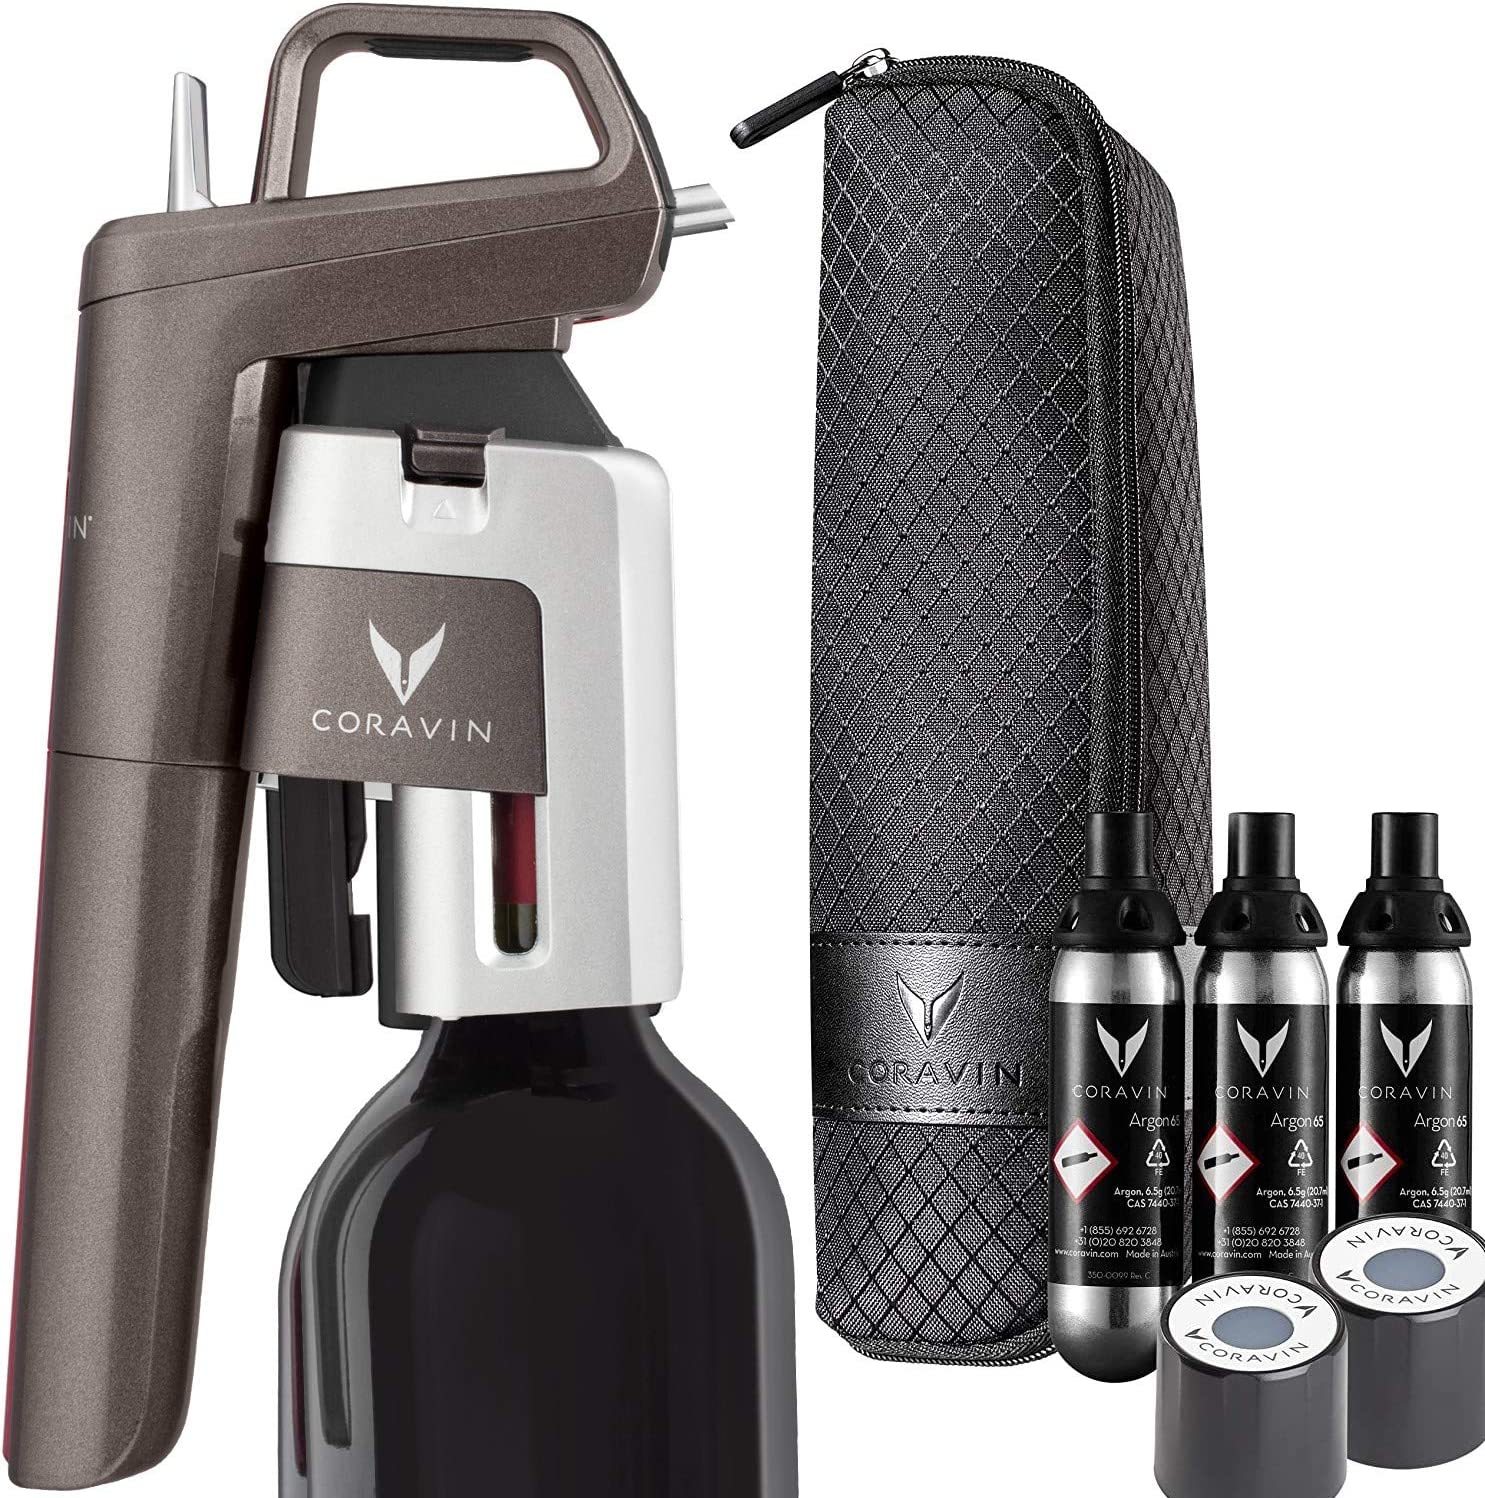 Coravin Advanced Wine Bottle Opener and Preservation System